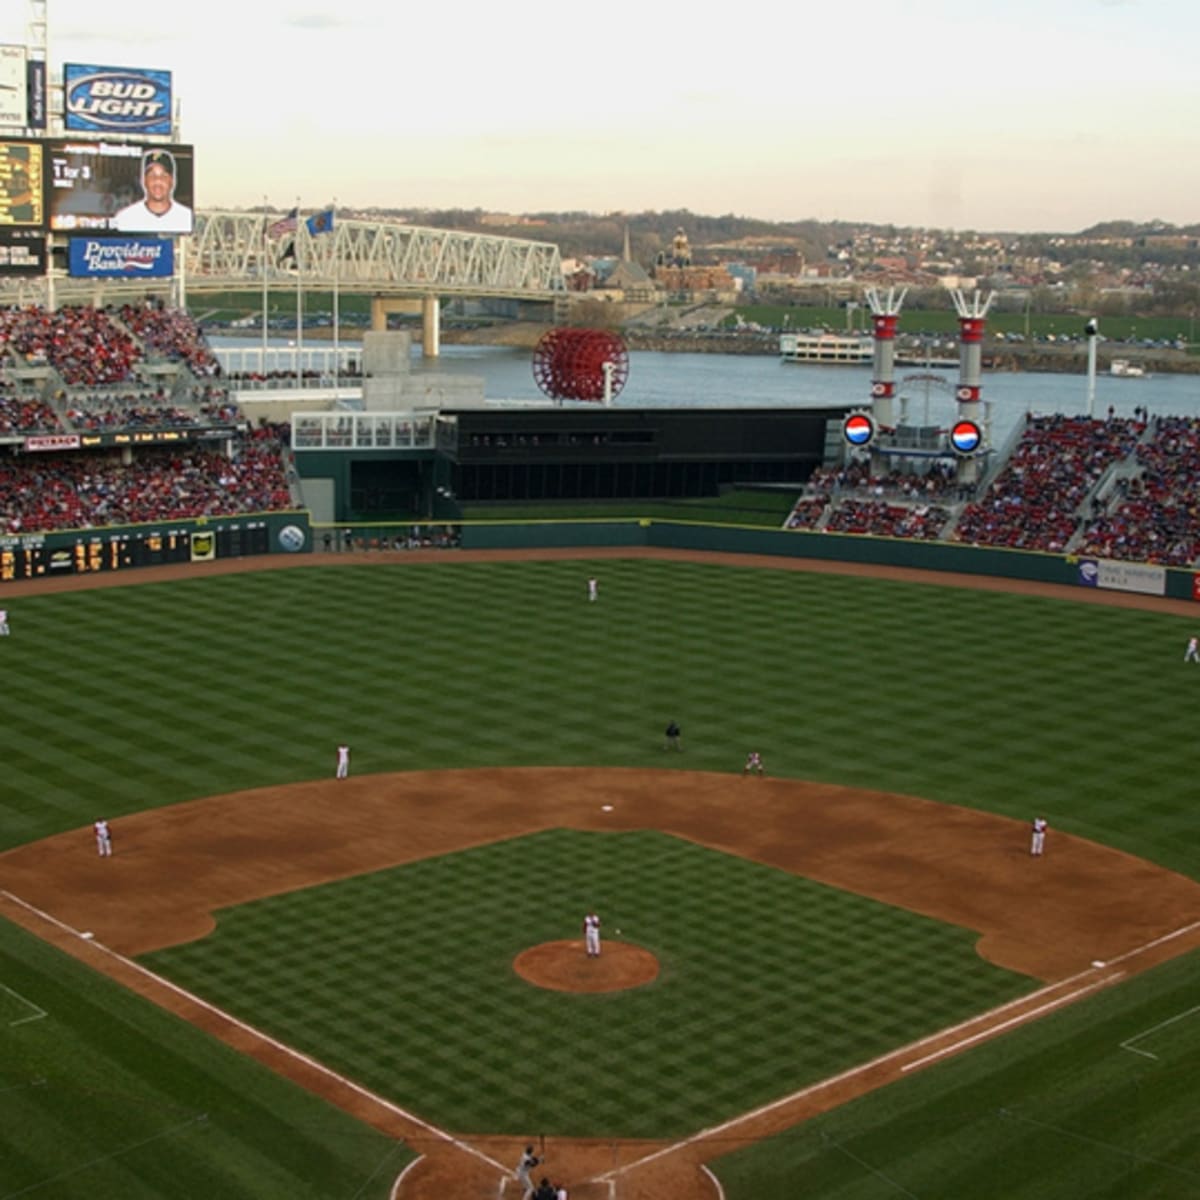 Ballpark Quirks: The Gap highlights the Reds' Great American